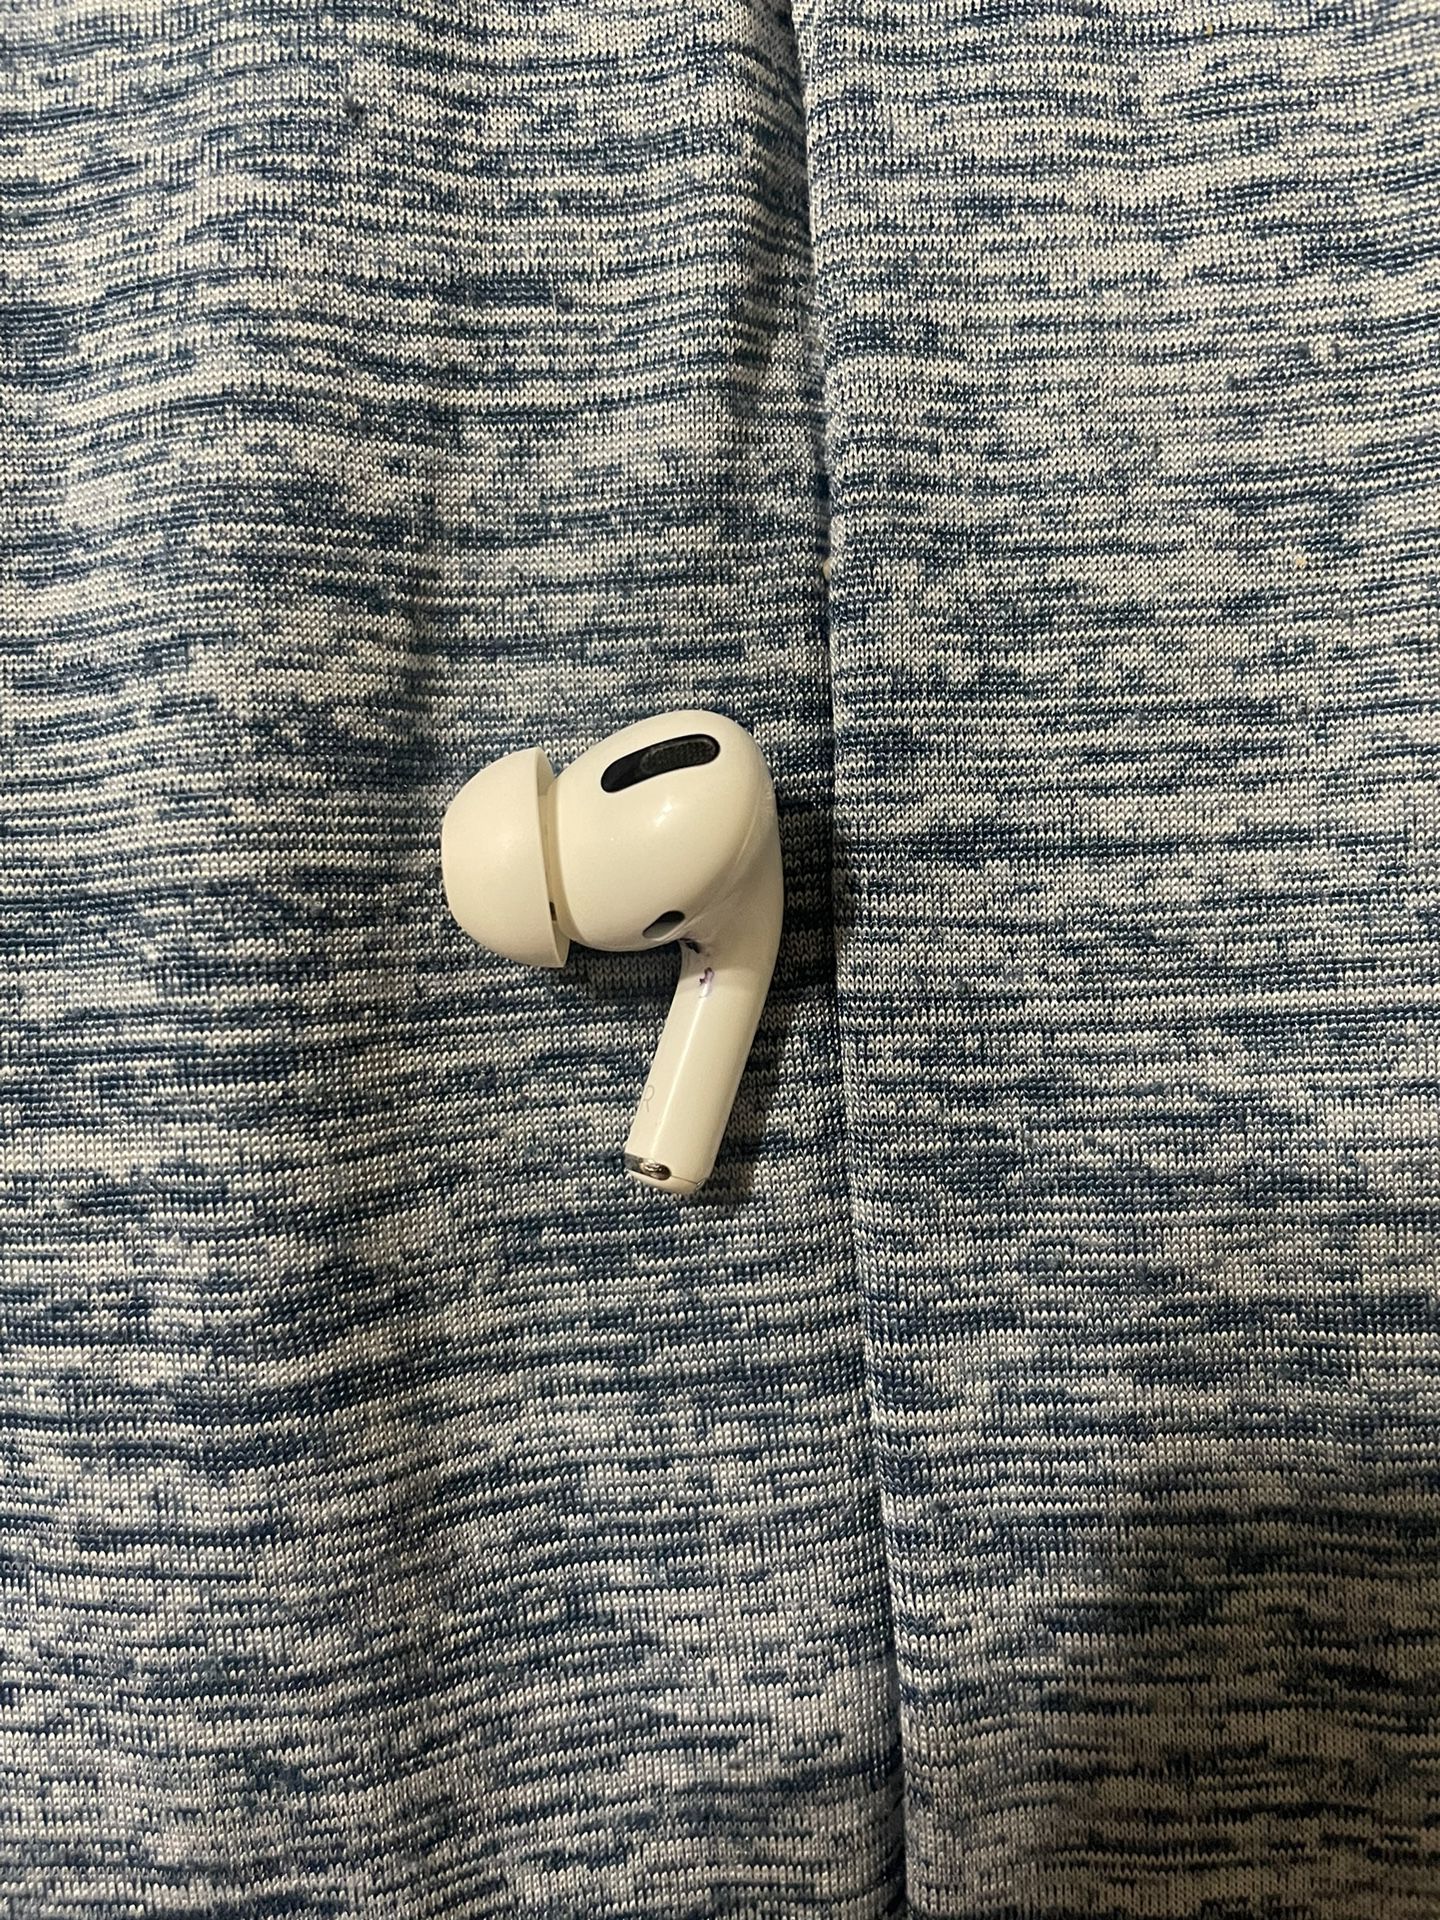 Airpod Pro Gen 1 (right Airpod Only)